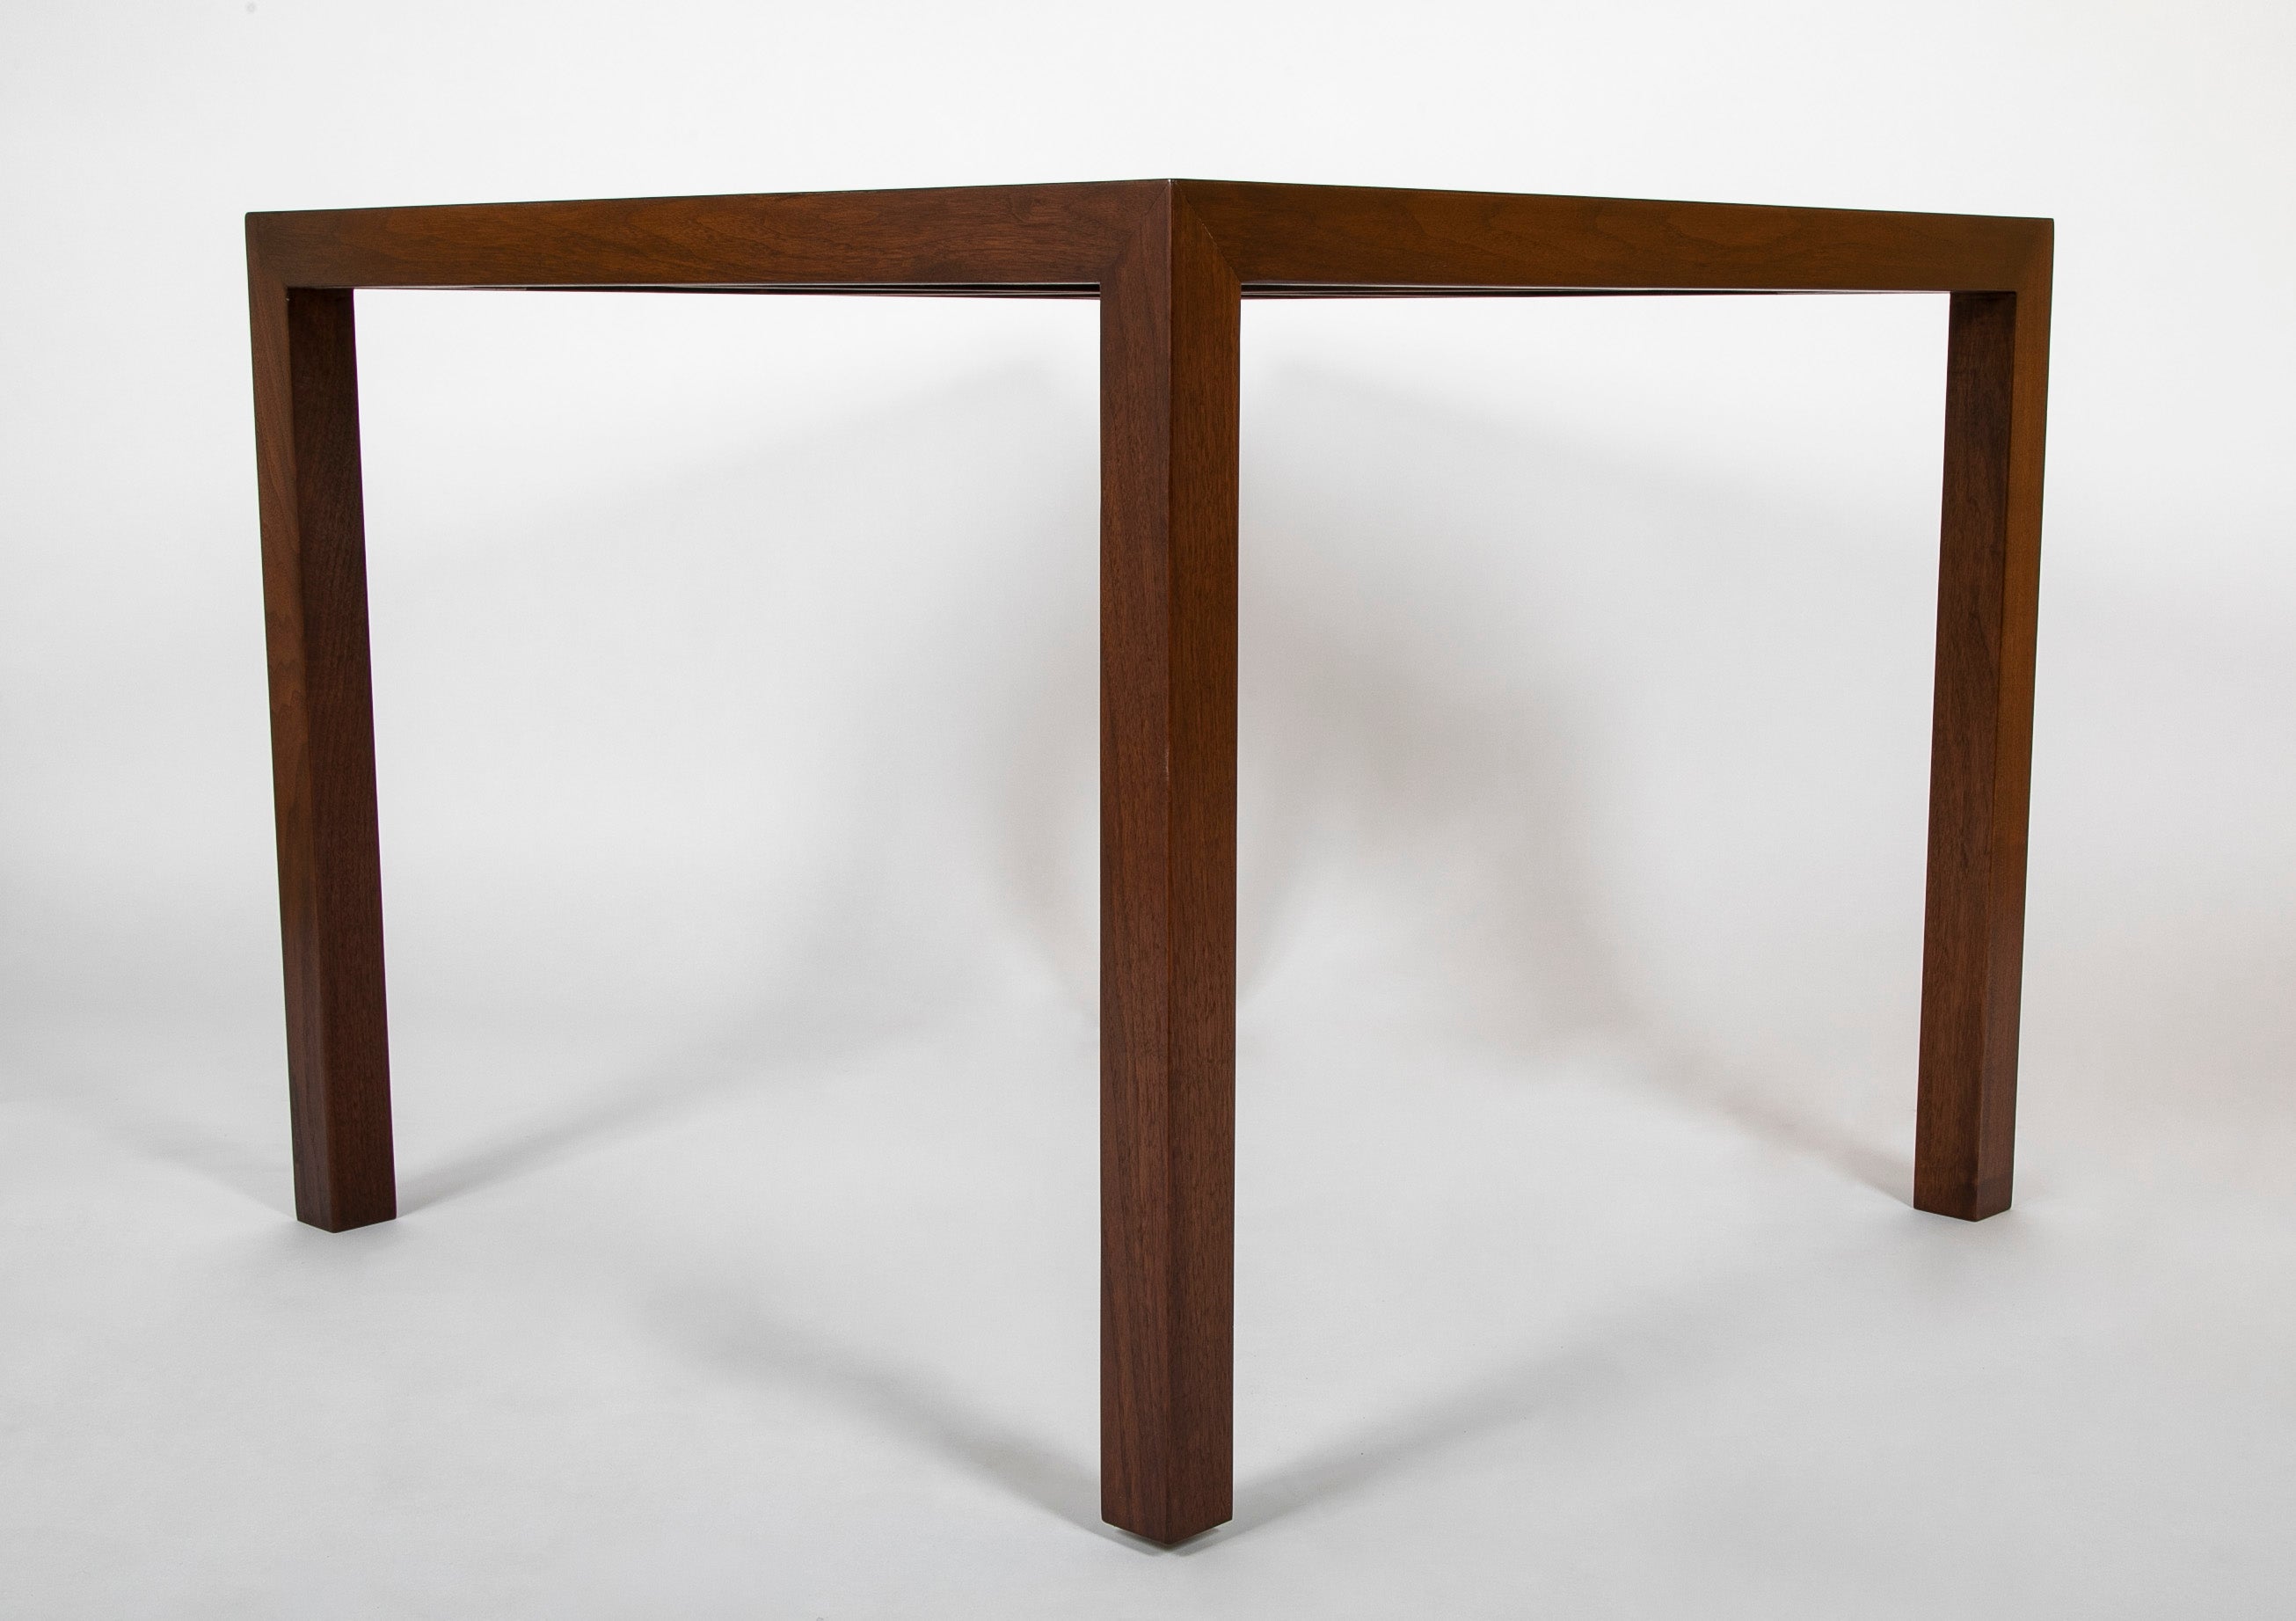 Games Table Designed by Philip Johnson and Produced by Baker for William A. M. Burden